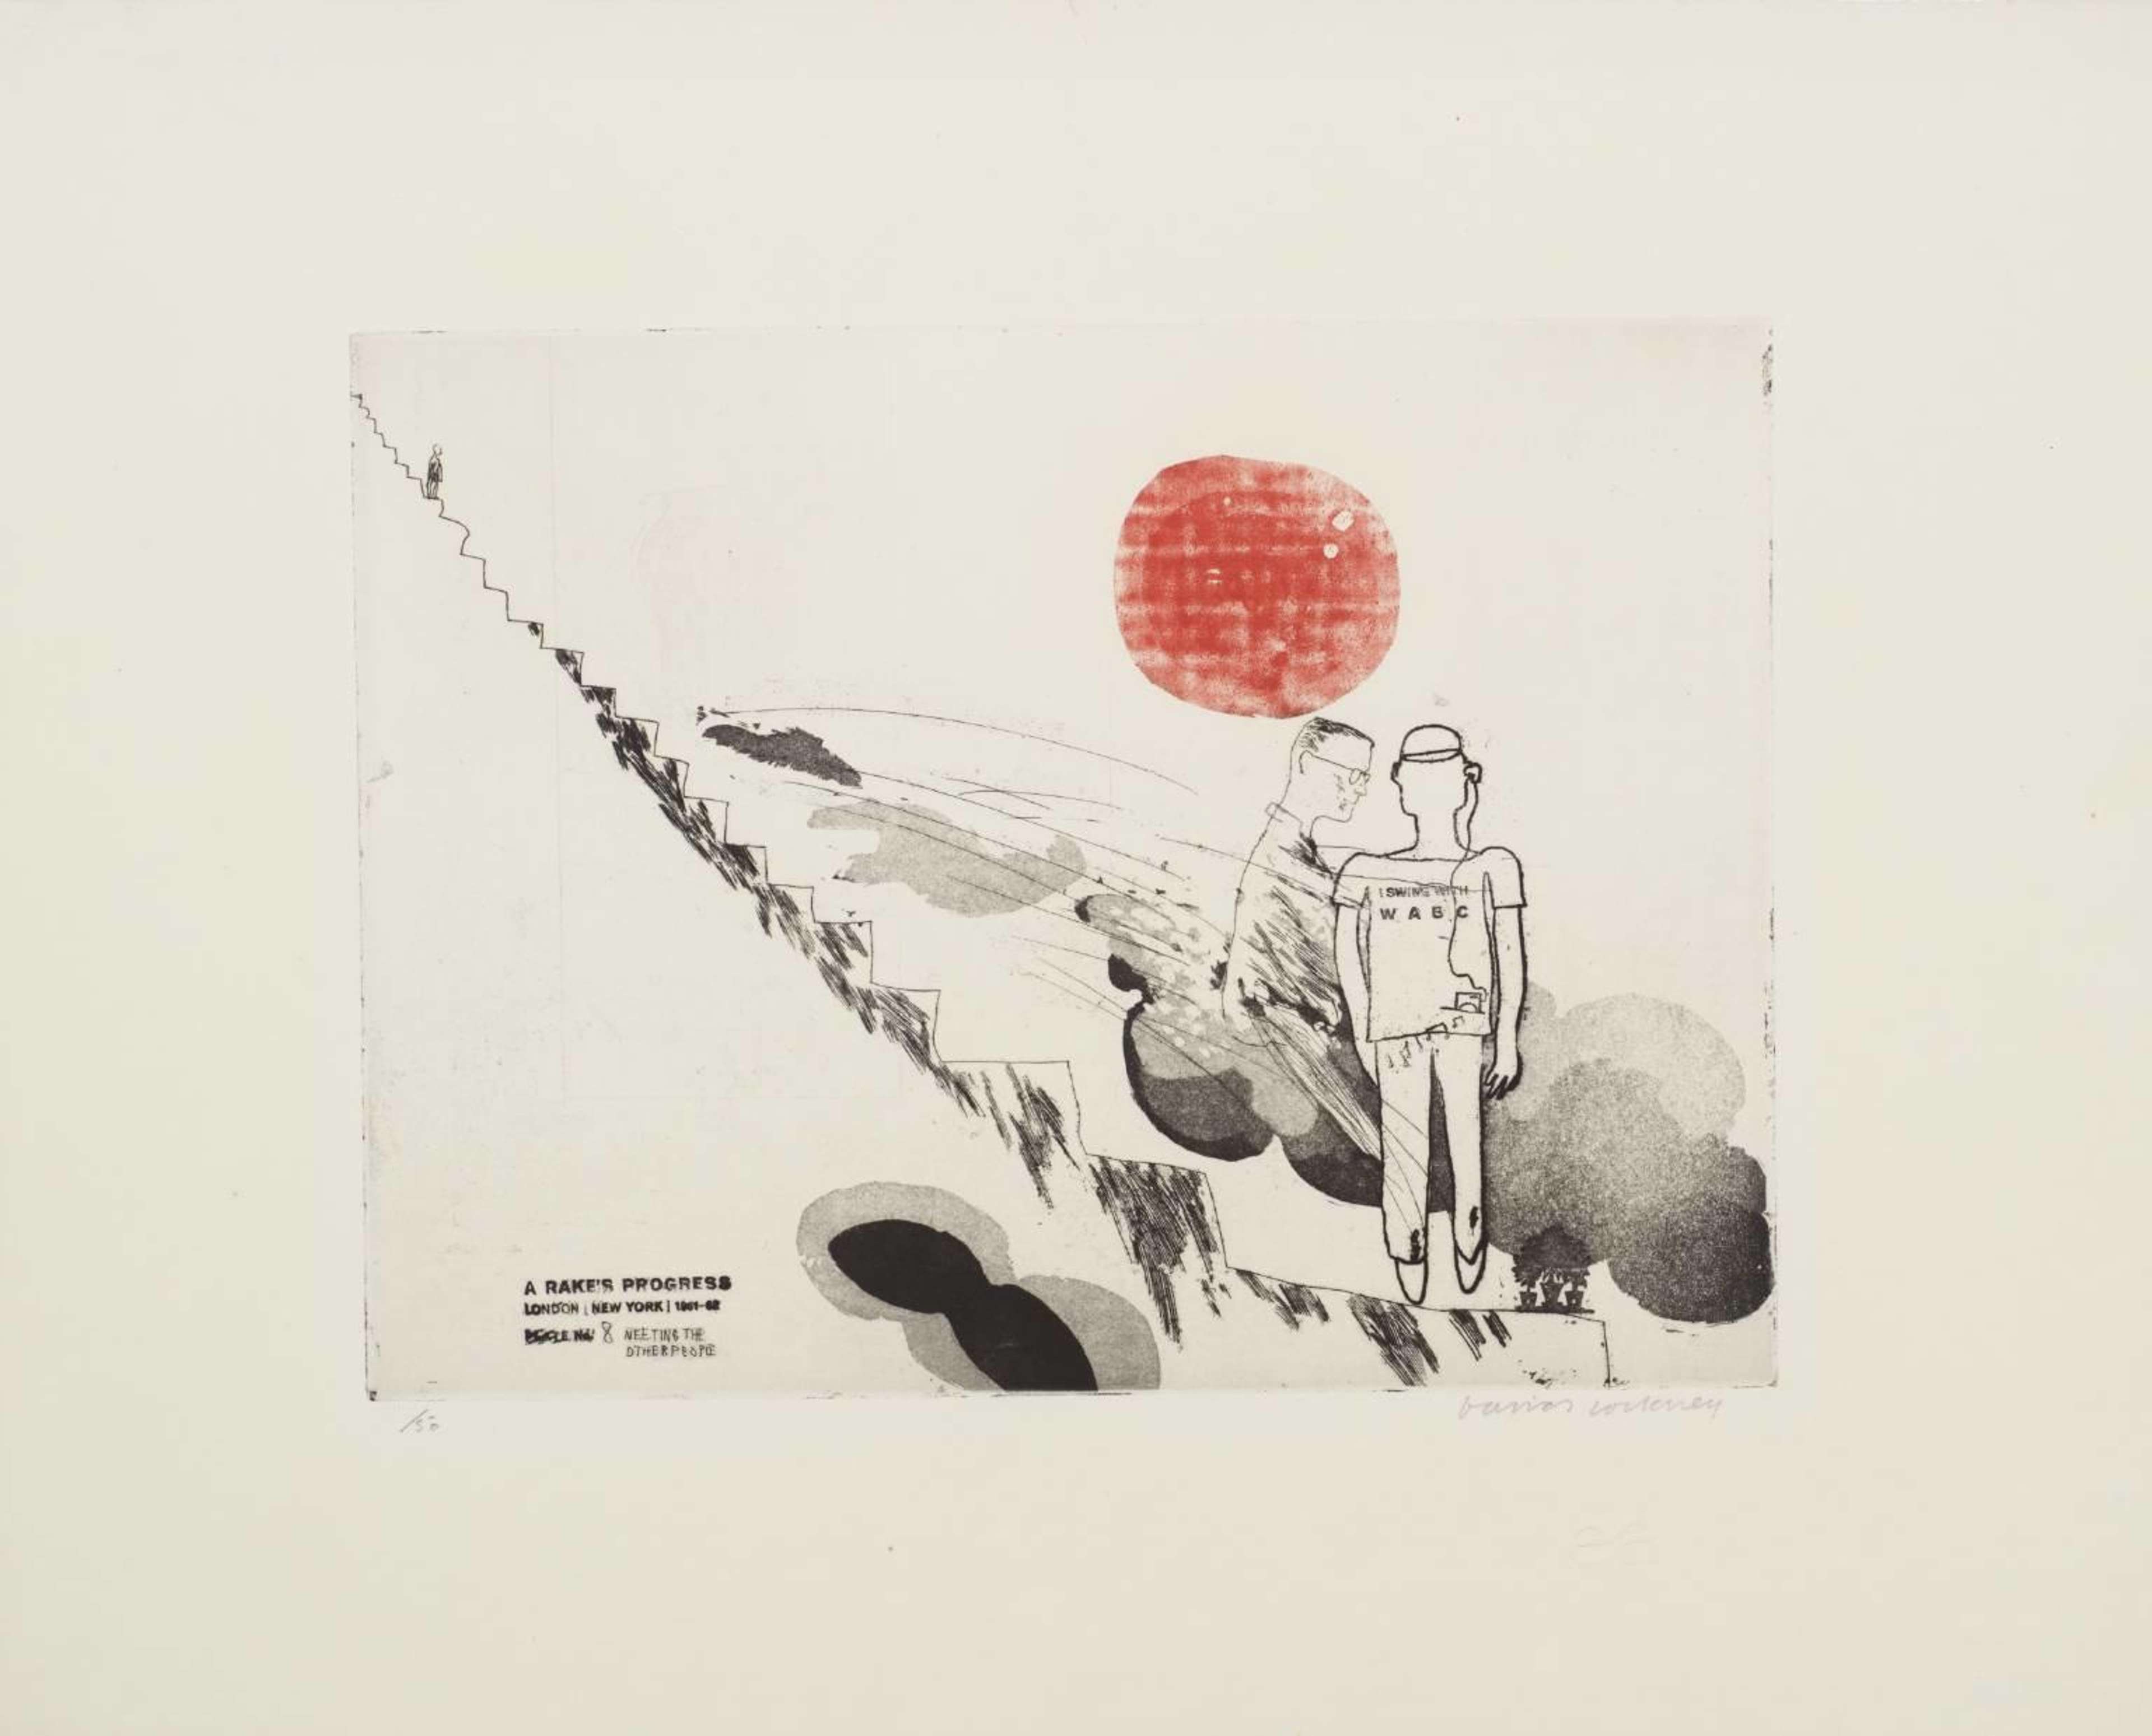 An etching by David Hockney depicting two male figures in black ink against an off-white paper background, with a red circle off-centre in the middle of the composition.